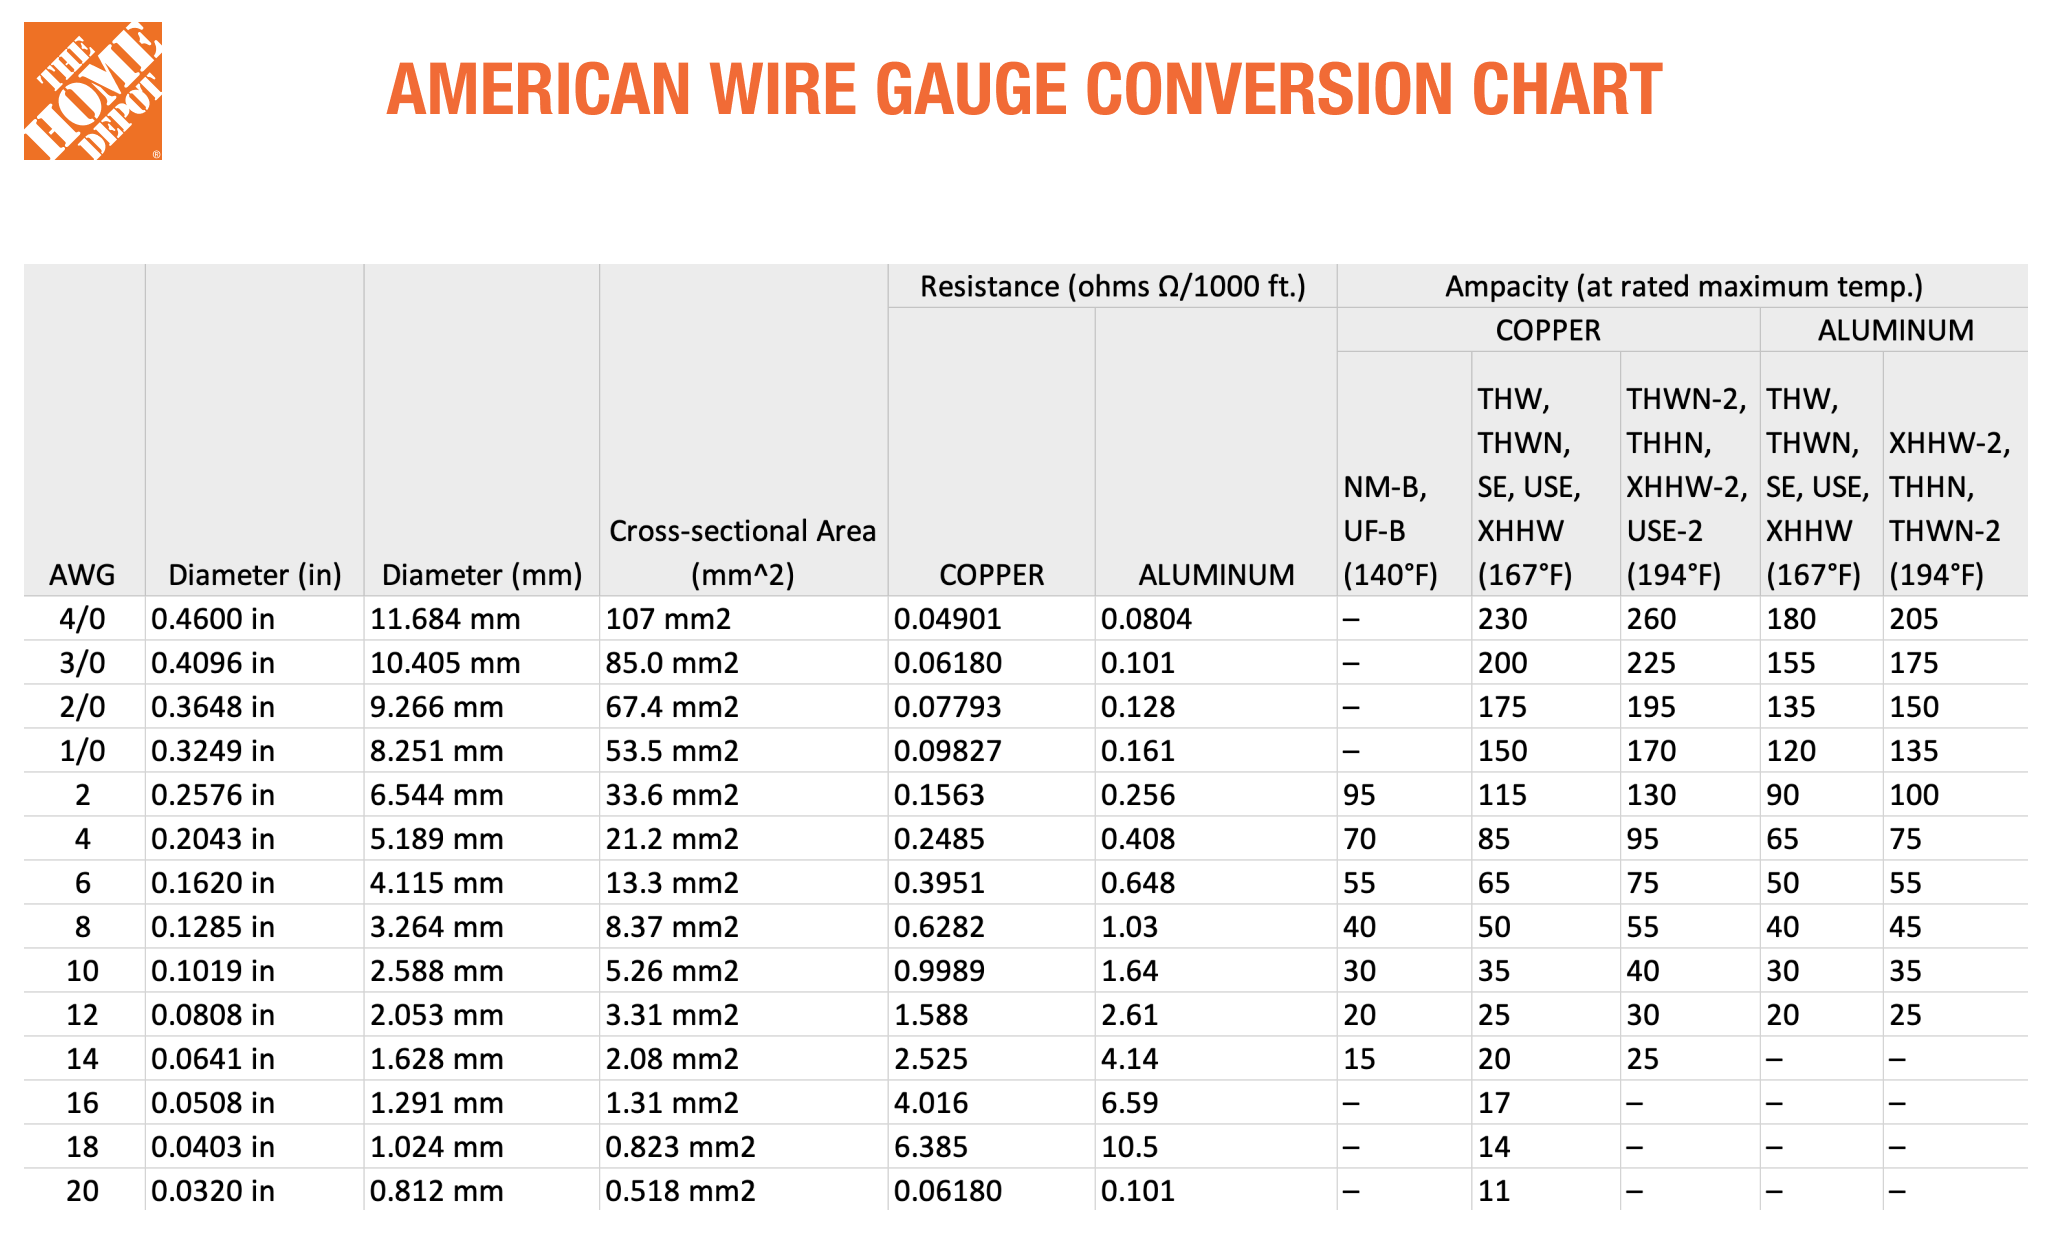 Wire Gauge Conversion Chart Wires Gauge Maps Charts Illustrations | My ...